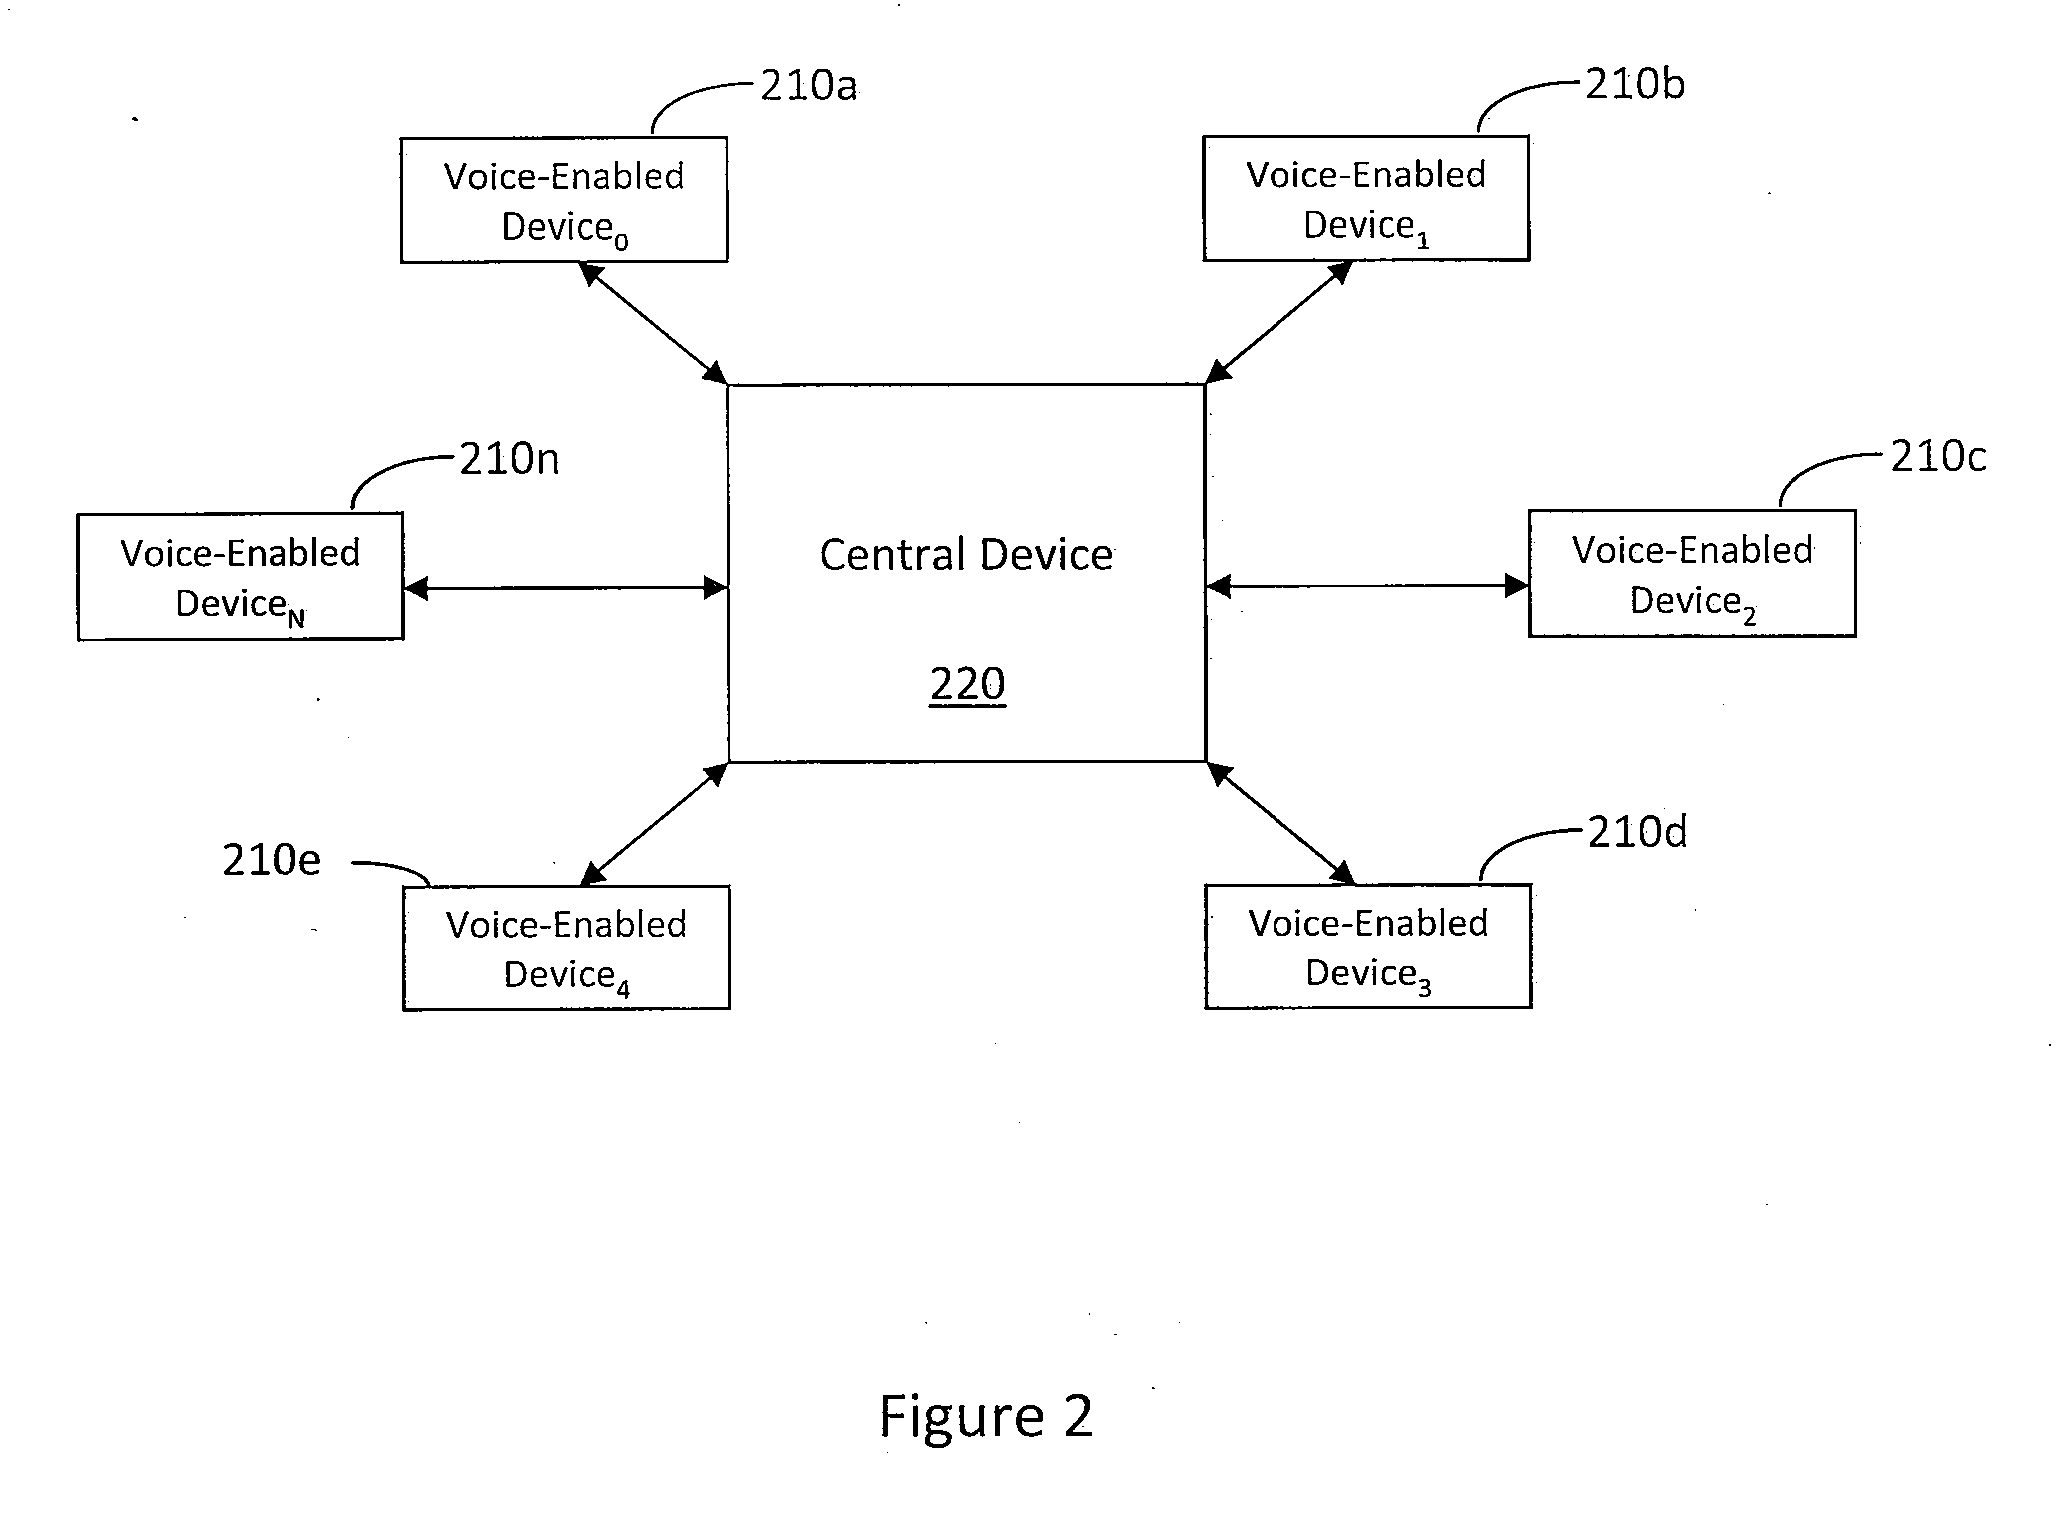 System and method for an integrated, multi-modal, multi-device natural language voice services environment